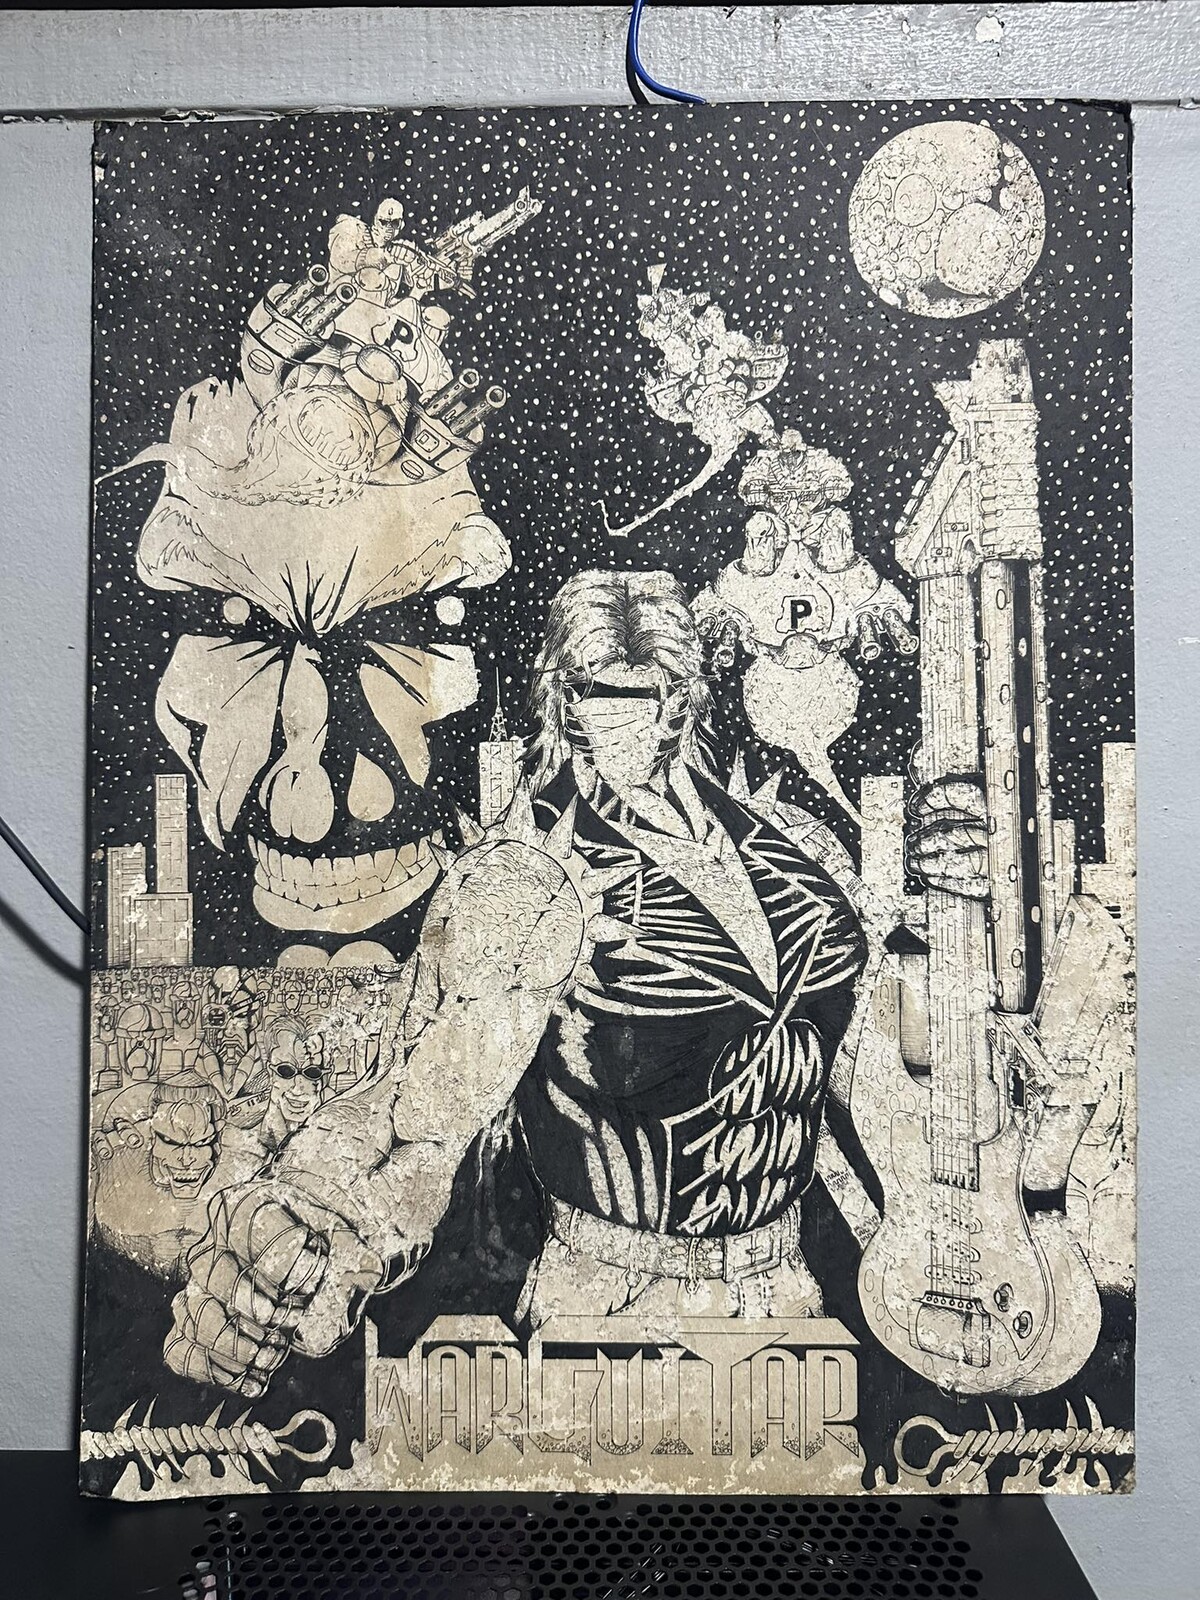 My 1997 Original Character WarGuitar, Pen and Ink on Illustration Board 18"x24"